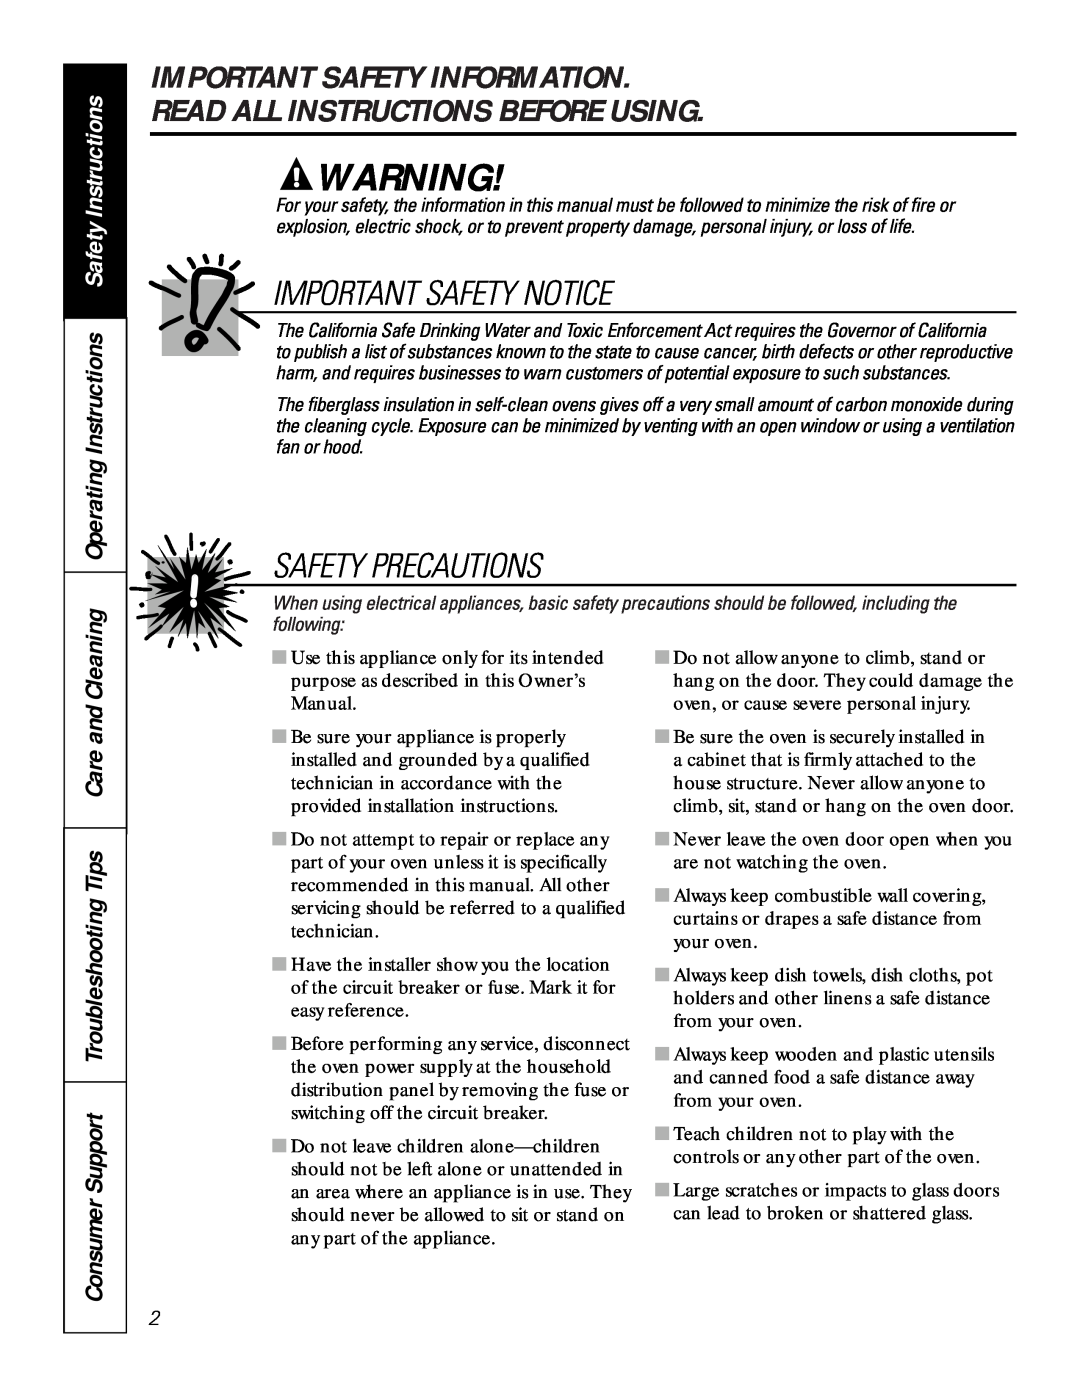 GE JCK 915 Important Safety Information Read All Instructions Before Using, Important Safety Notice, Safety Precautions 